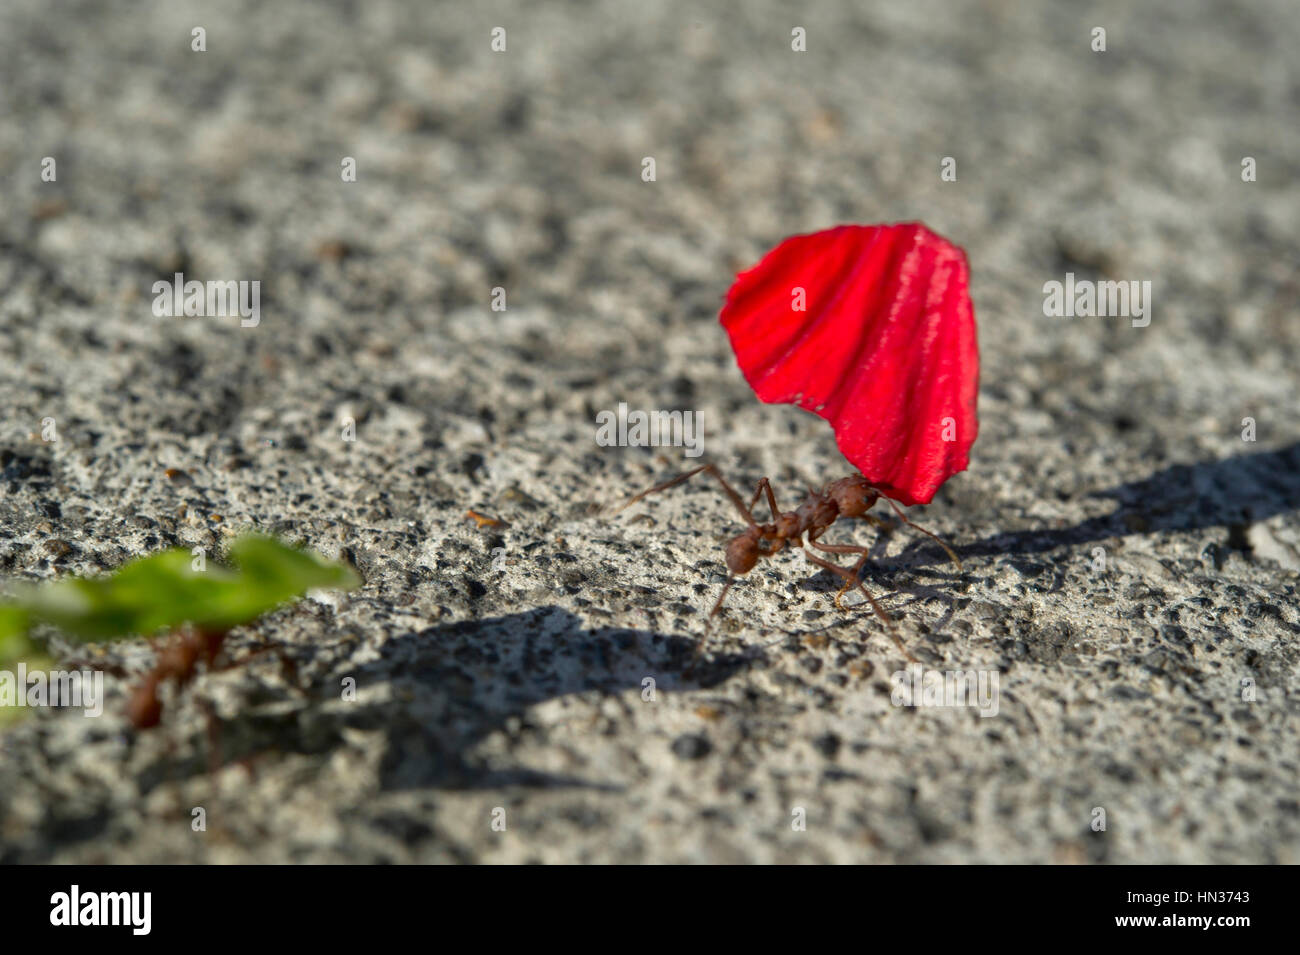 Leaf-cutter ant (Atta cephalotes) carrying a red flower petal Stock Photo